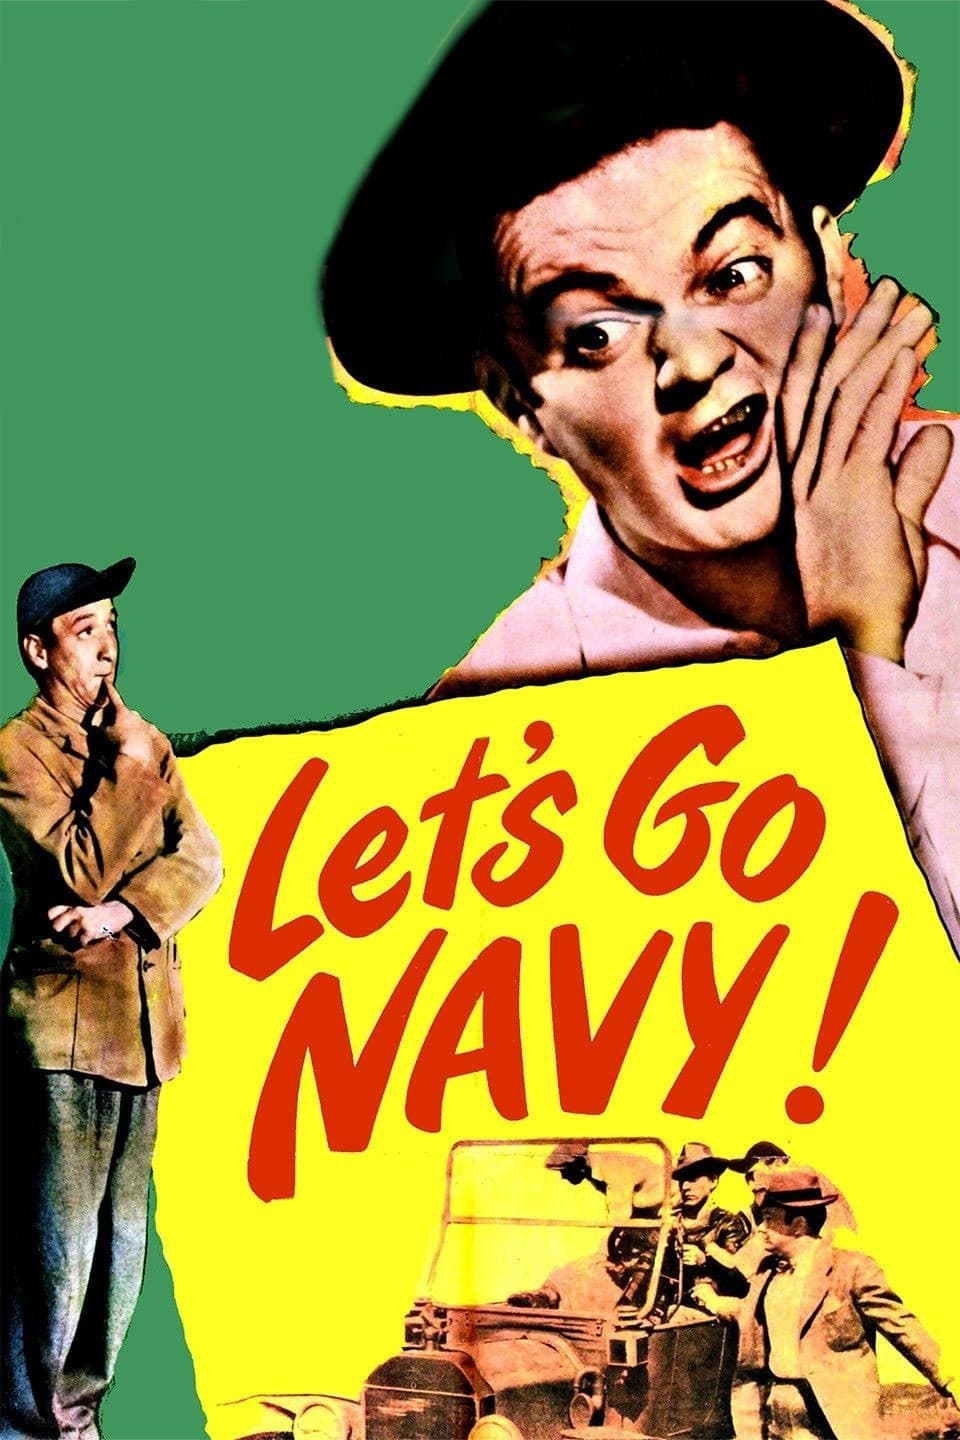 Let's Go Navy! Poster